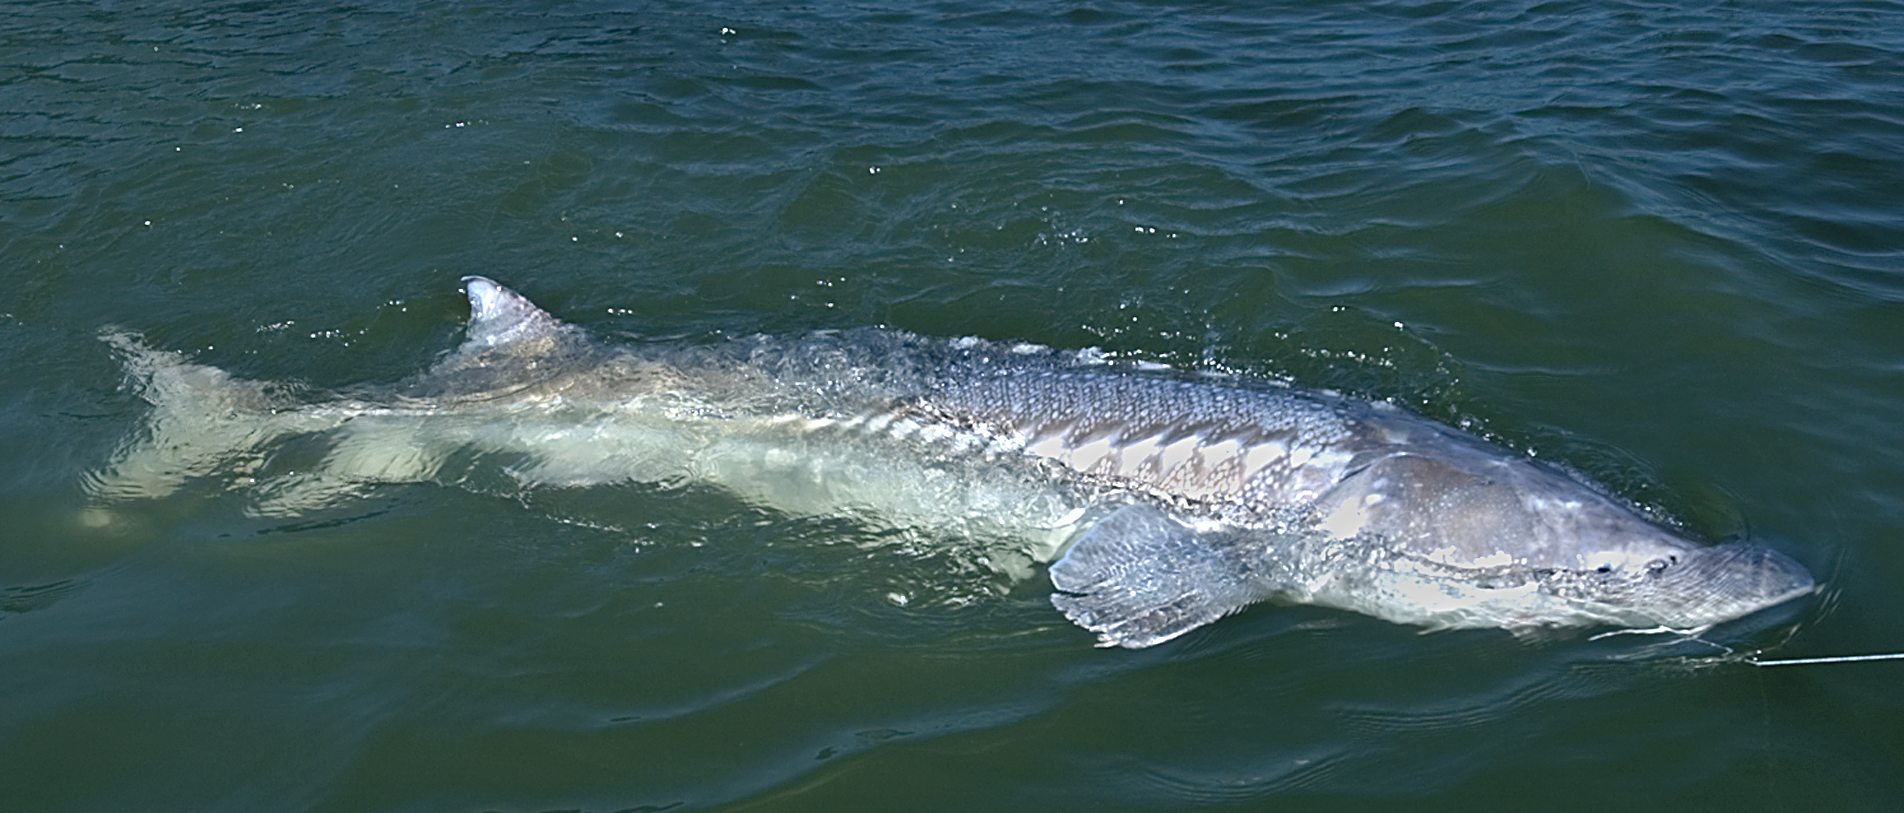 Anglers in the lower Columbia will see their sturgeon catch allocation reduced again in 2012.